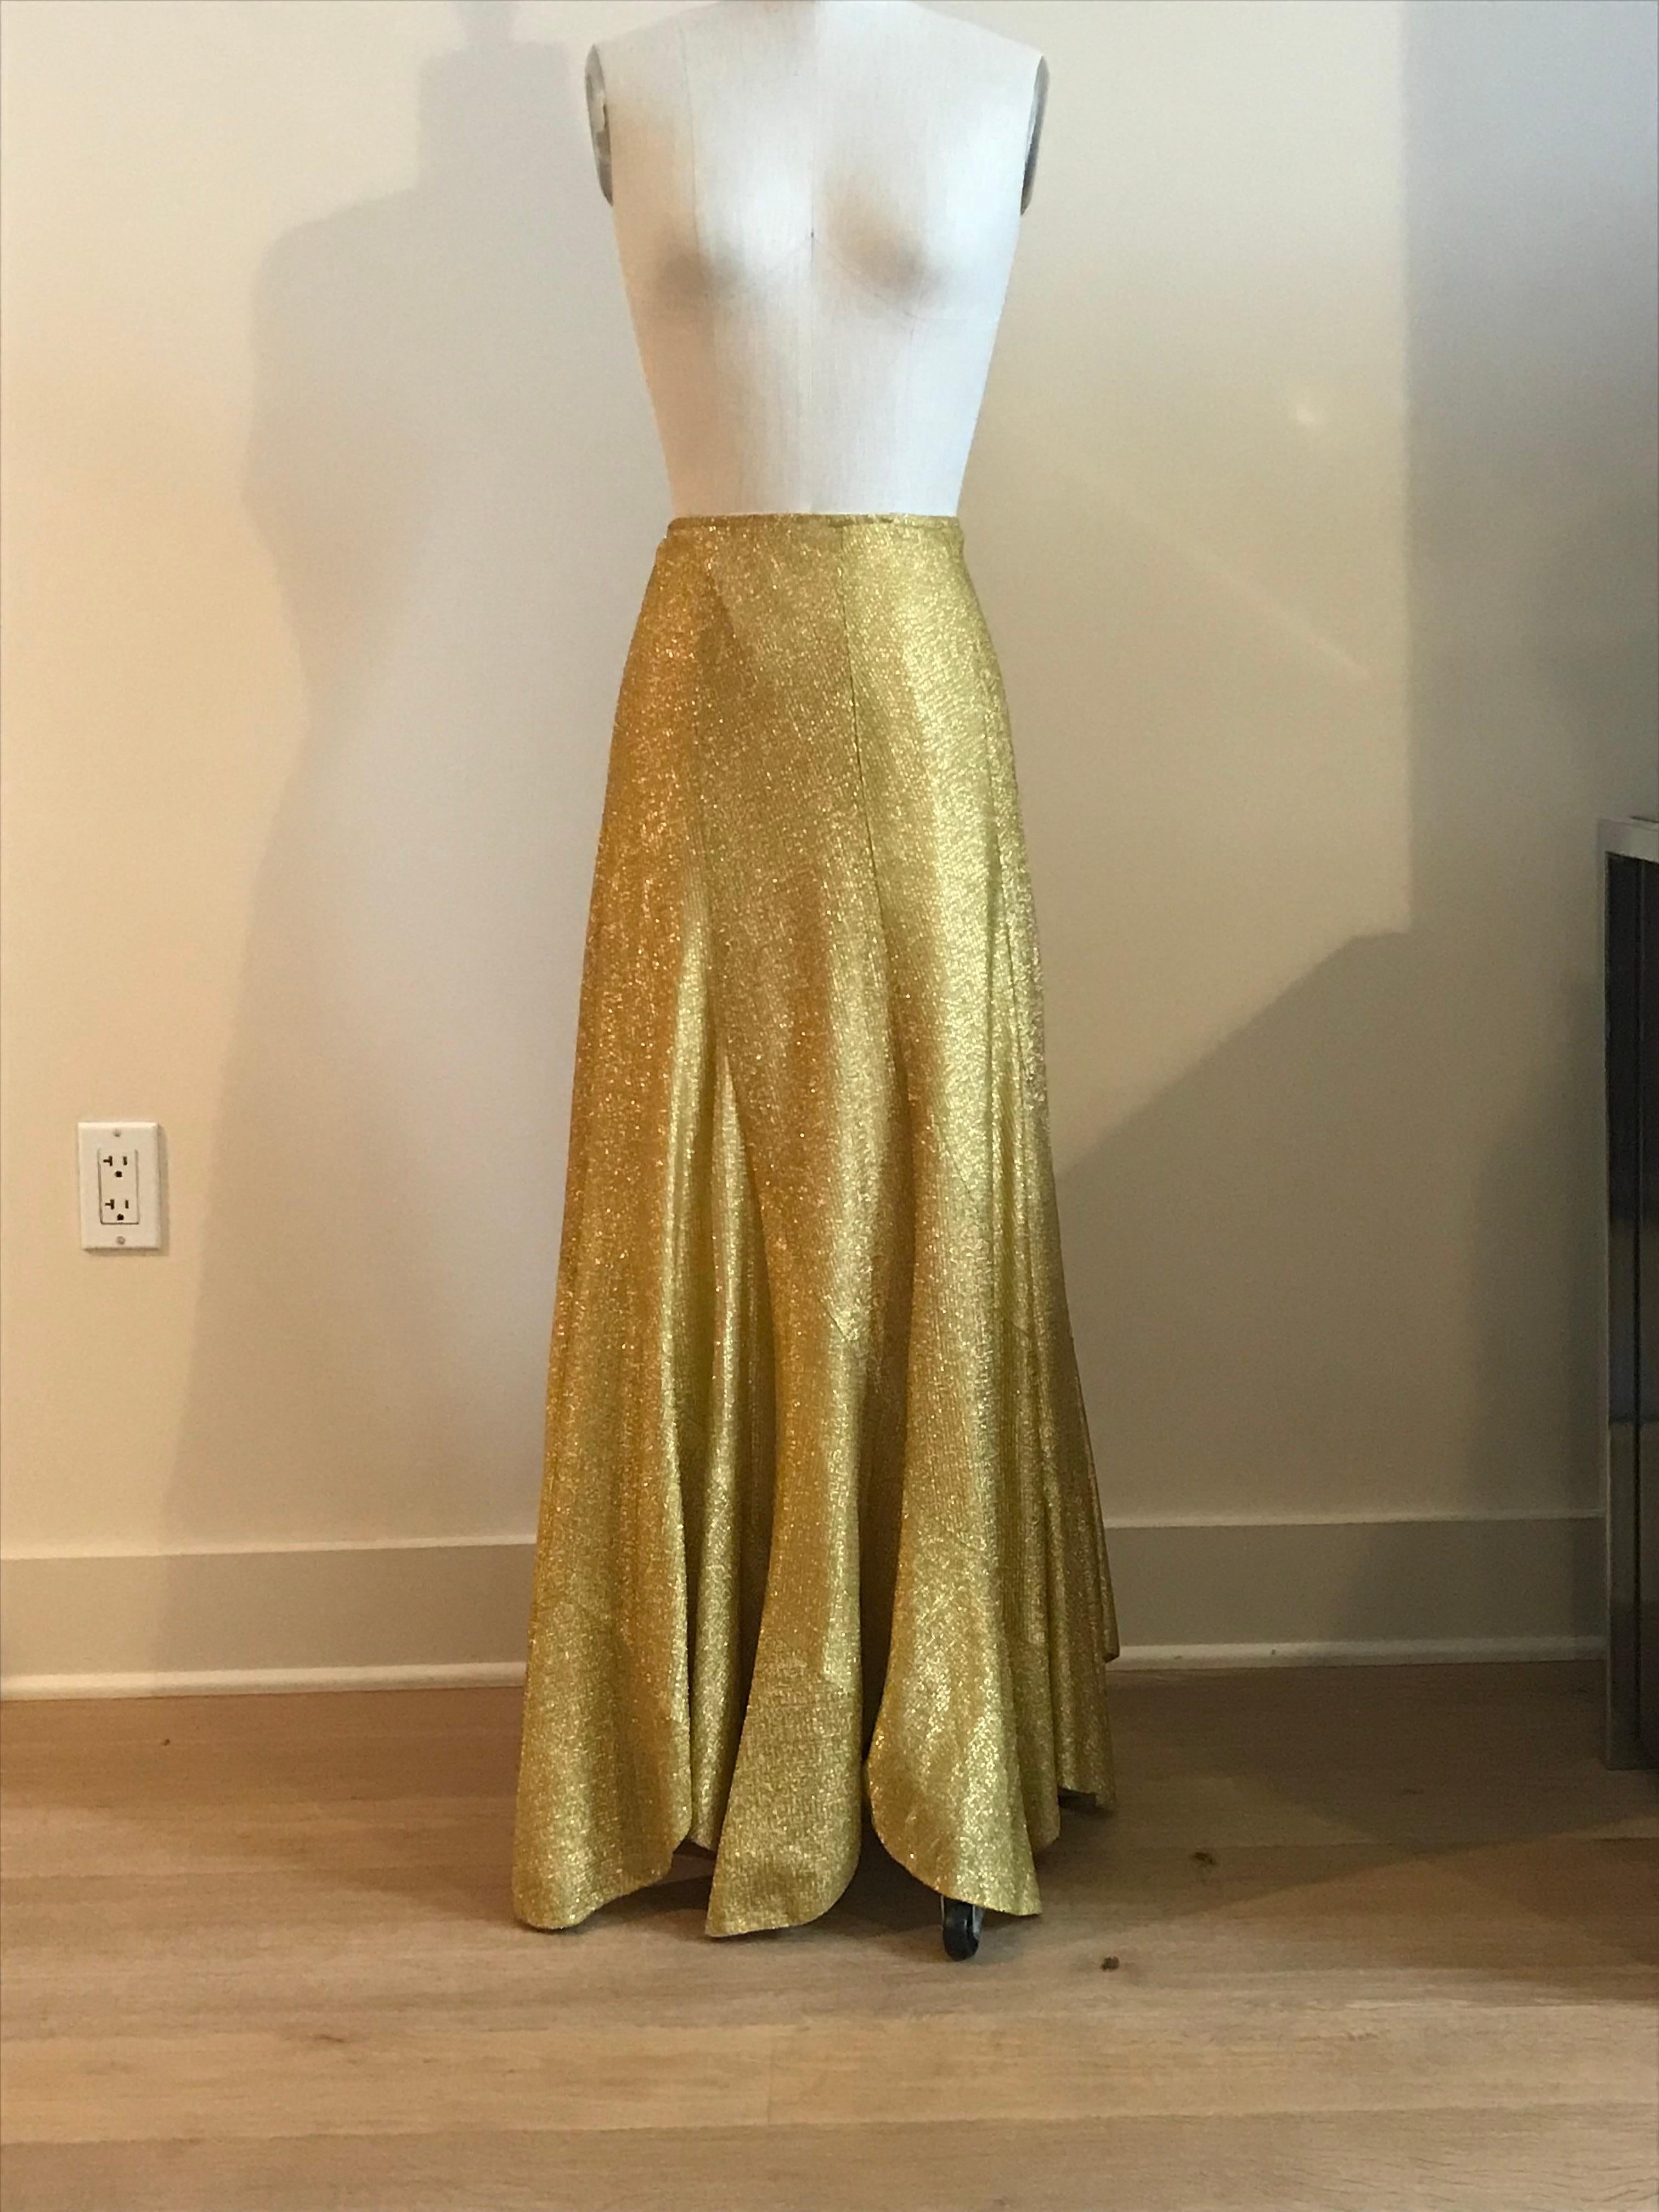 Vintage 1960s or 70s metallic gold maxi skirt by Beverly Paige. Side zip.

Pair with a silk camisole for a night out, or top with an oversized t-shirt and wear with a pair of sneakers for a funky day time look.

Content unknown. Fully lined.

Made